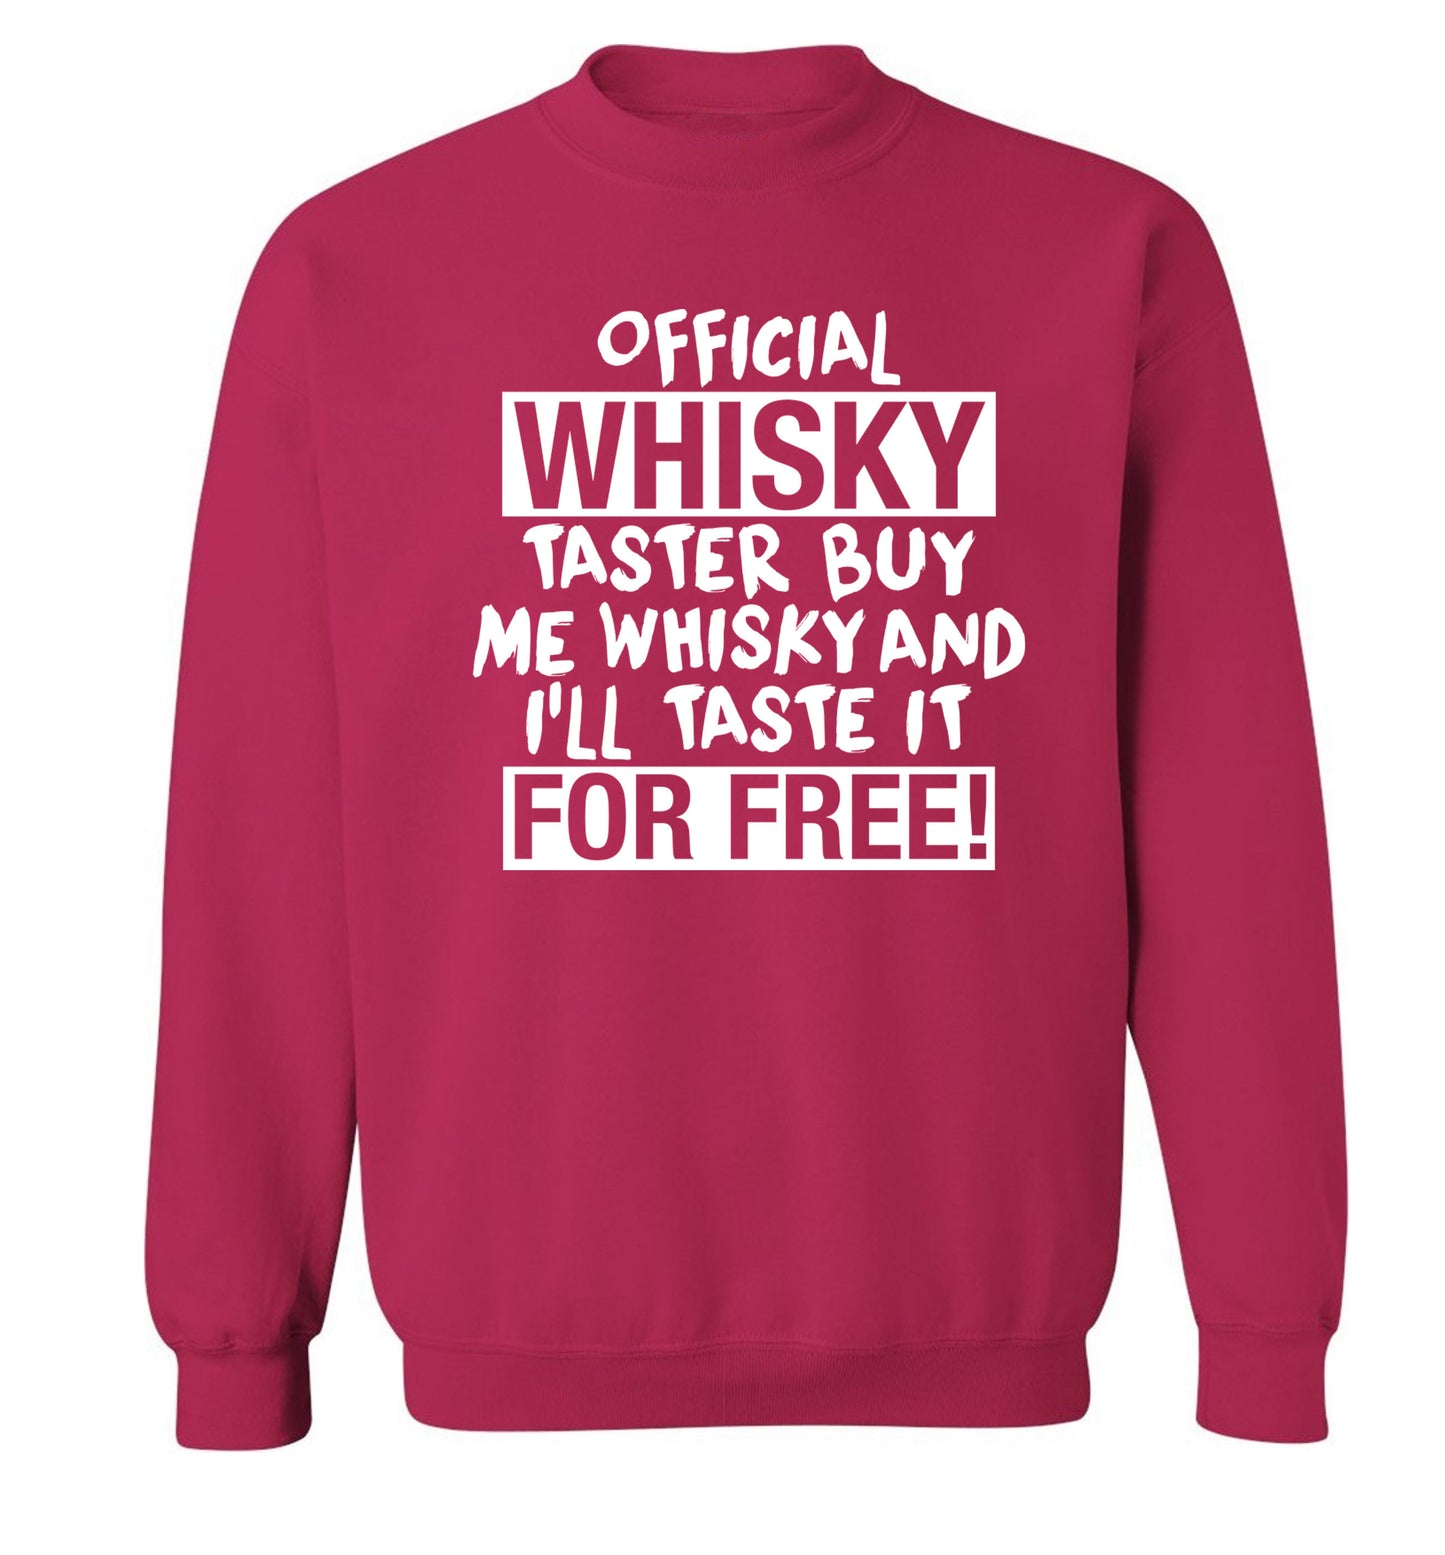 Official whisky taster buy me whisky and I'll taste it for free Adult's unisex pink Sweater 2XL